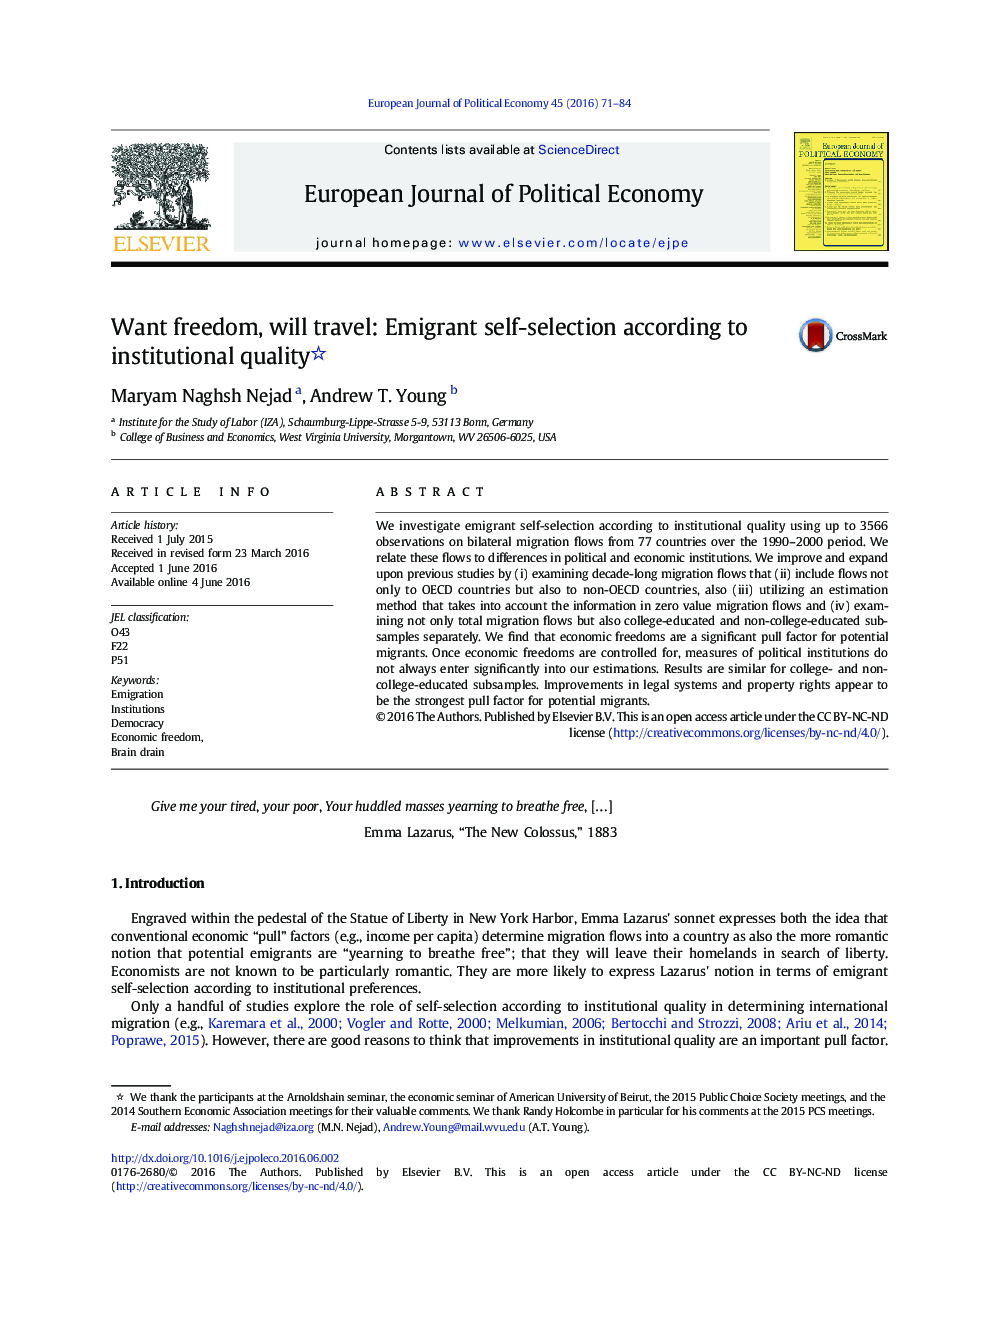 Want freedom, will travel: Emigrant self-selection according to institutional quality